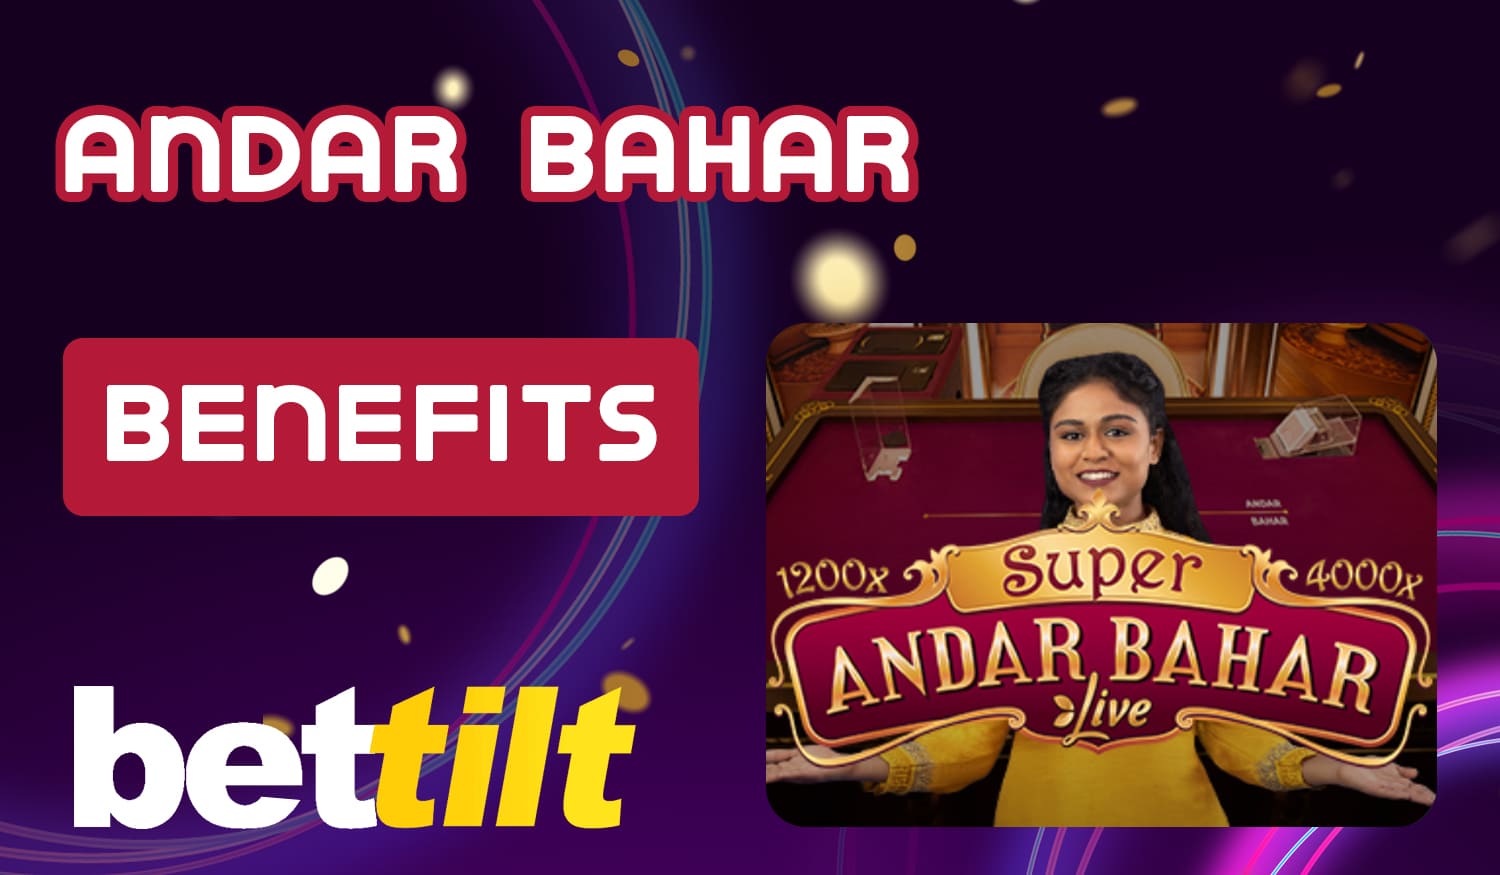 What are the advantages of playing Andar Bahar on the Bettilt website